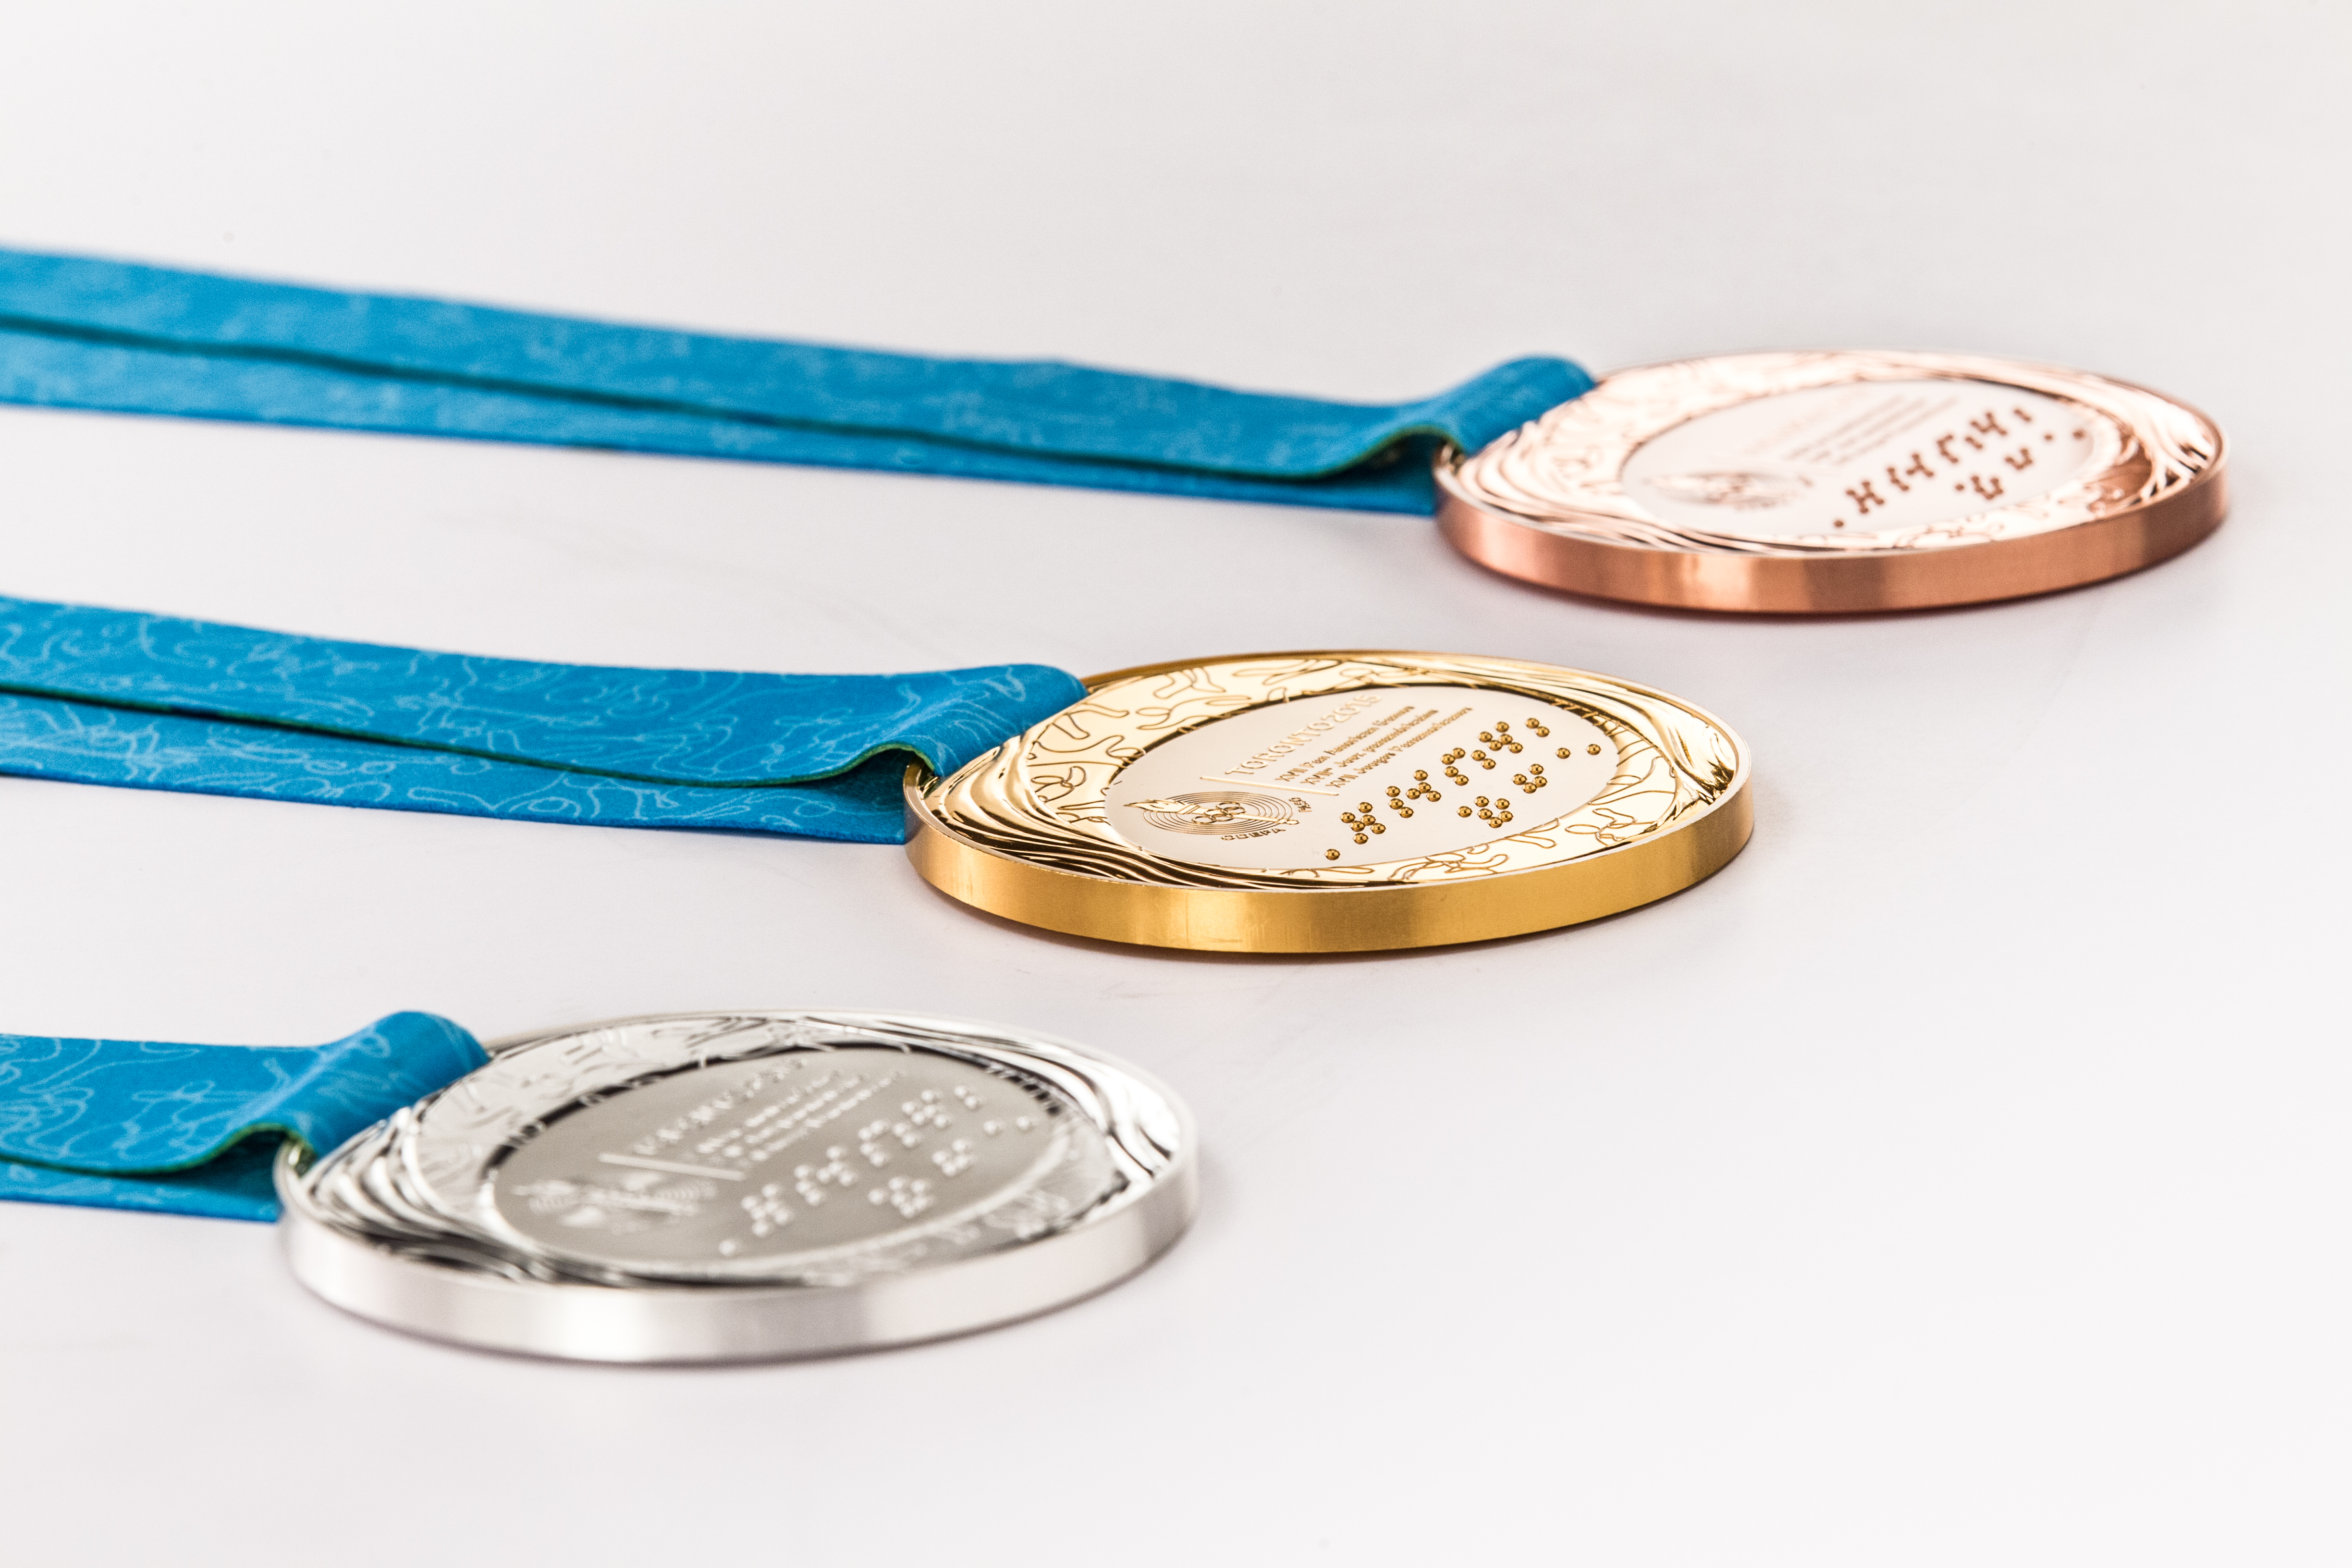 Pan Am Games Competition Medals (Back)